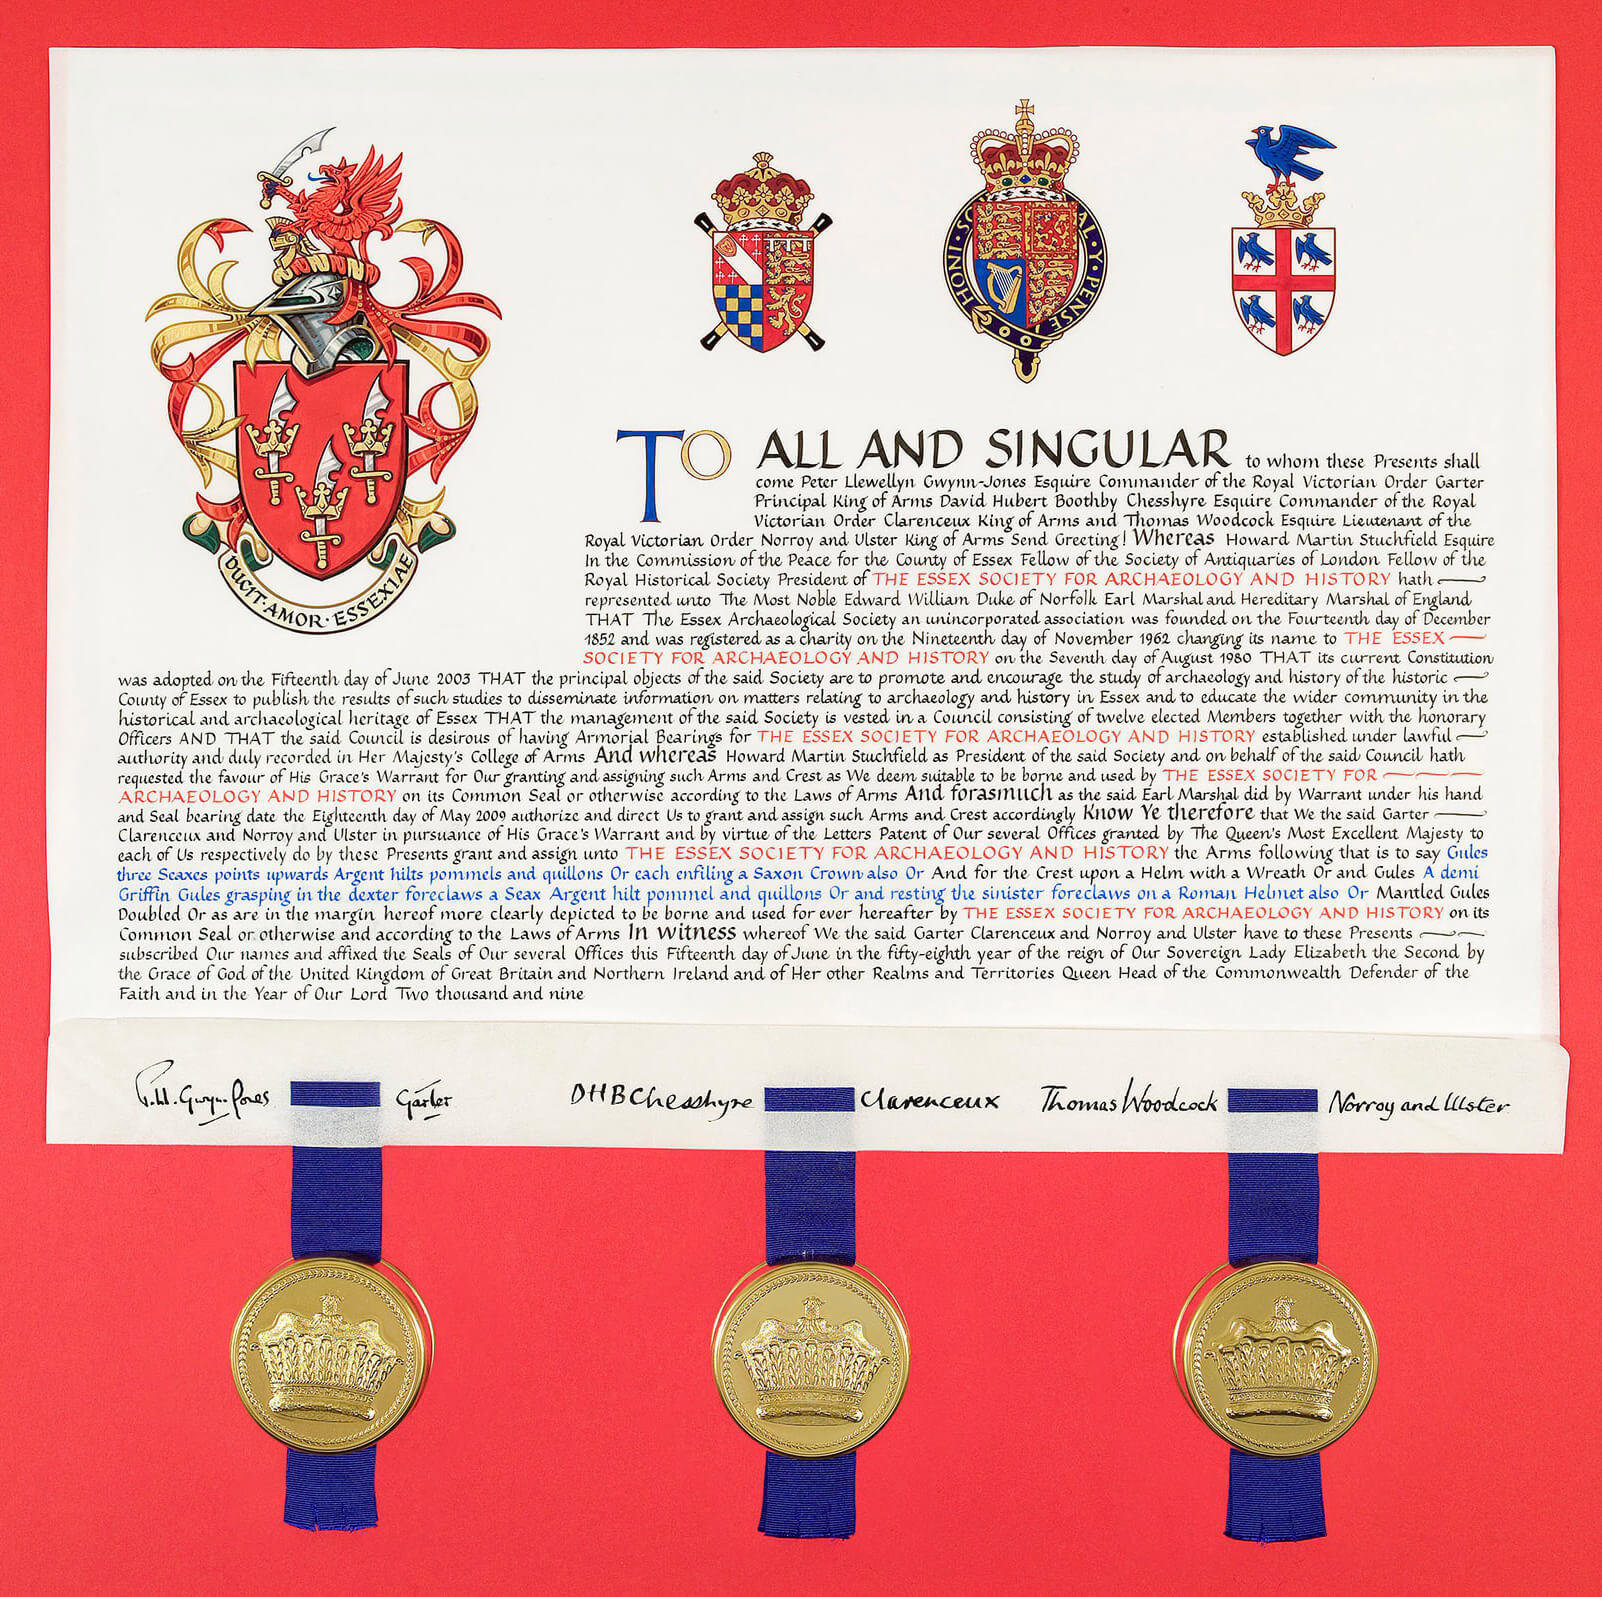 Letters Patent granted by the College of Arms